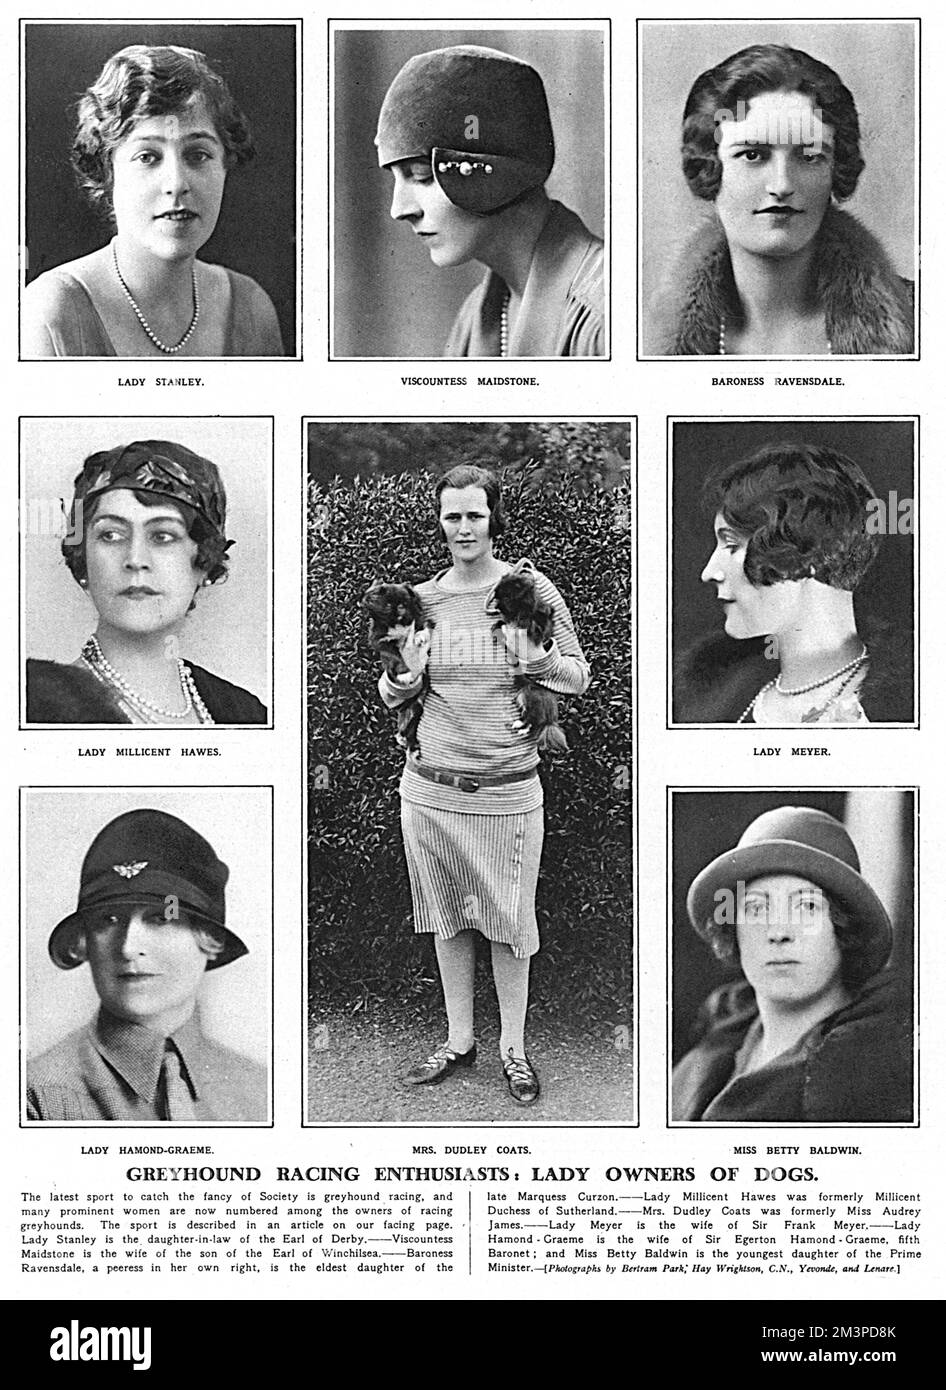 Greyhound racing enthusiasts - lady owners of dogs in 1927 just as the sport was gaining widespread popularity among society.  The women who had interests in greyhounds were Lady Stanley, Viscountess Maidstone, Baroness Ravensdale, Lady Millicent Hawes, Lady Hamond-Graeme, Mrs Dudley Coats, Miss Betty Baldwin and Lady Meyer.  1927 Stock Photo